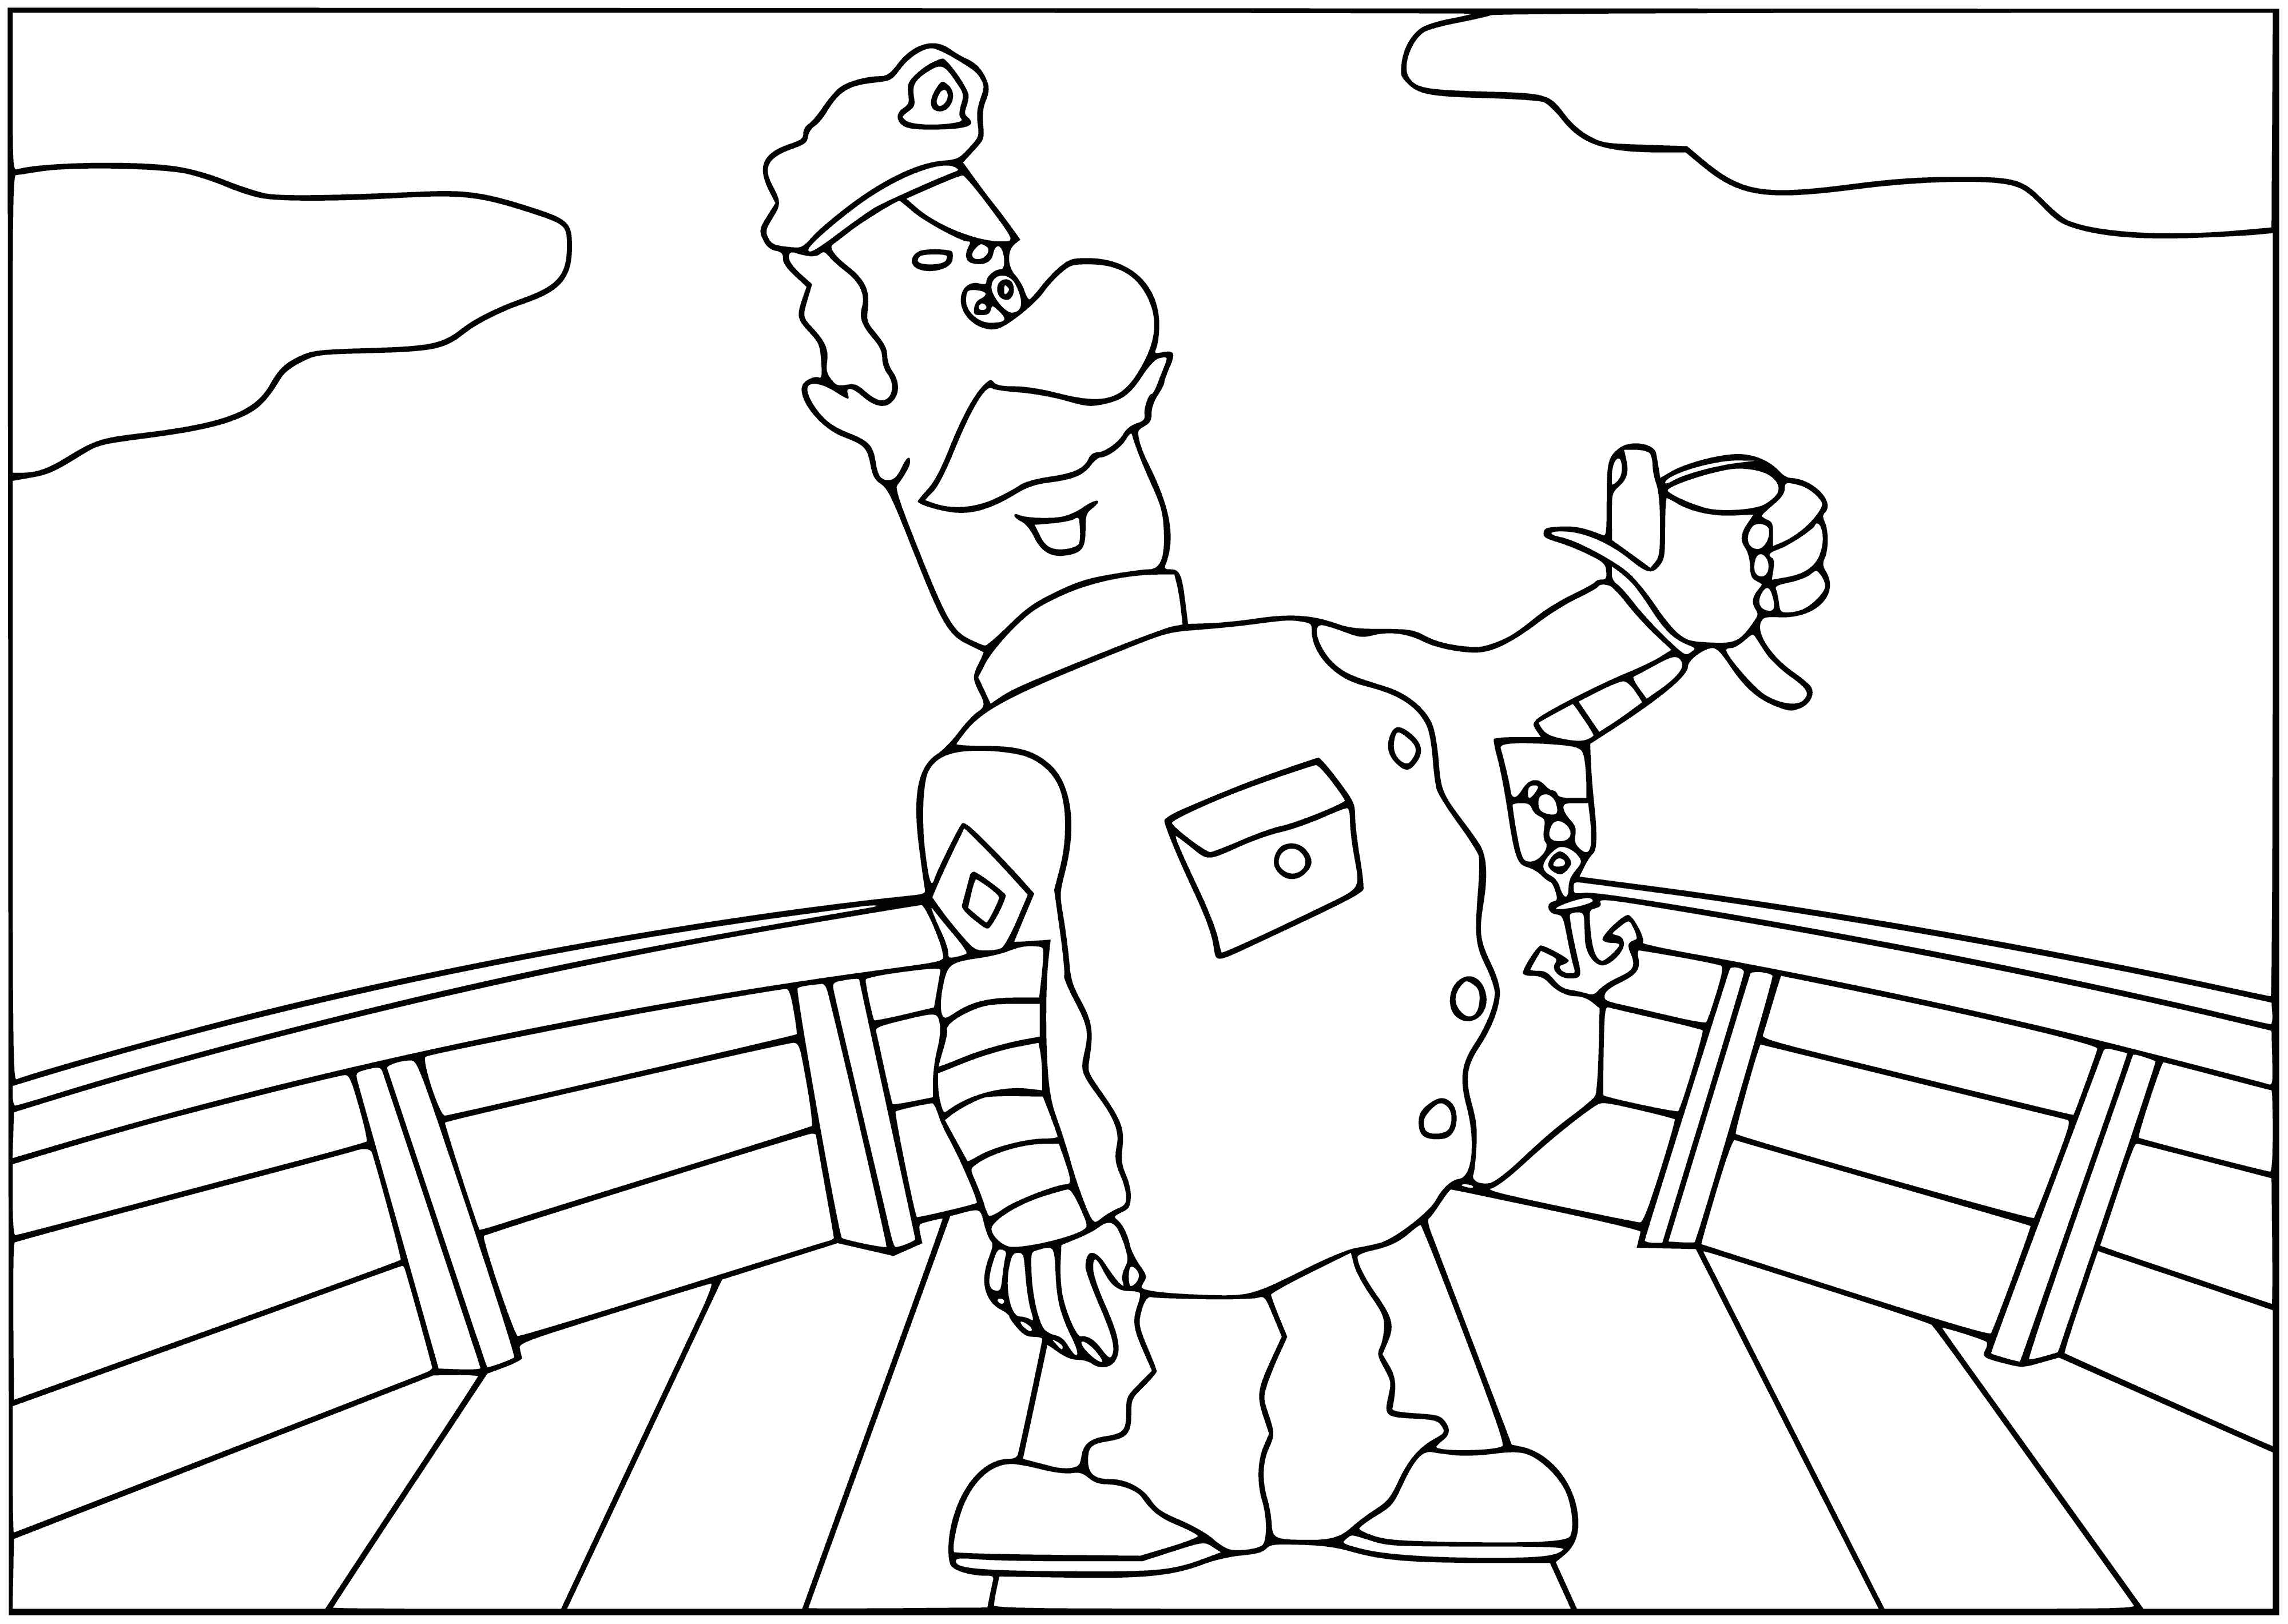 coloring page: Man w/ sword, hat & cape sits on chair. Ship sails on sea in background.